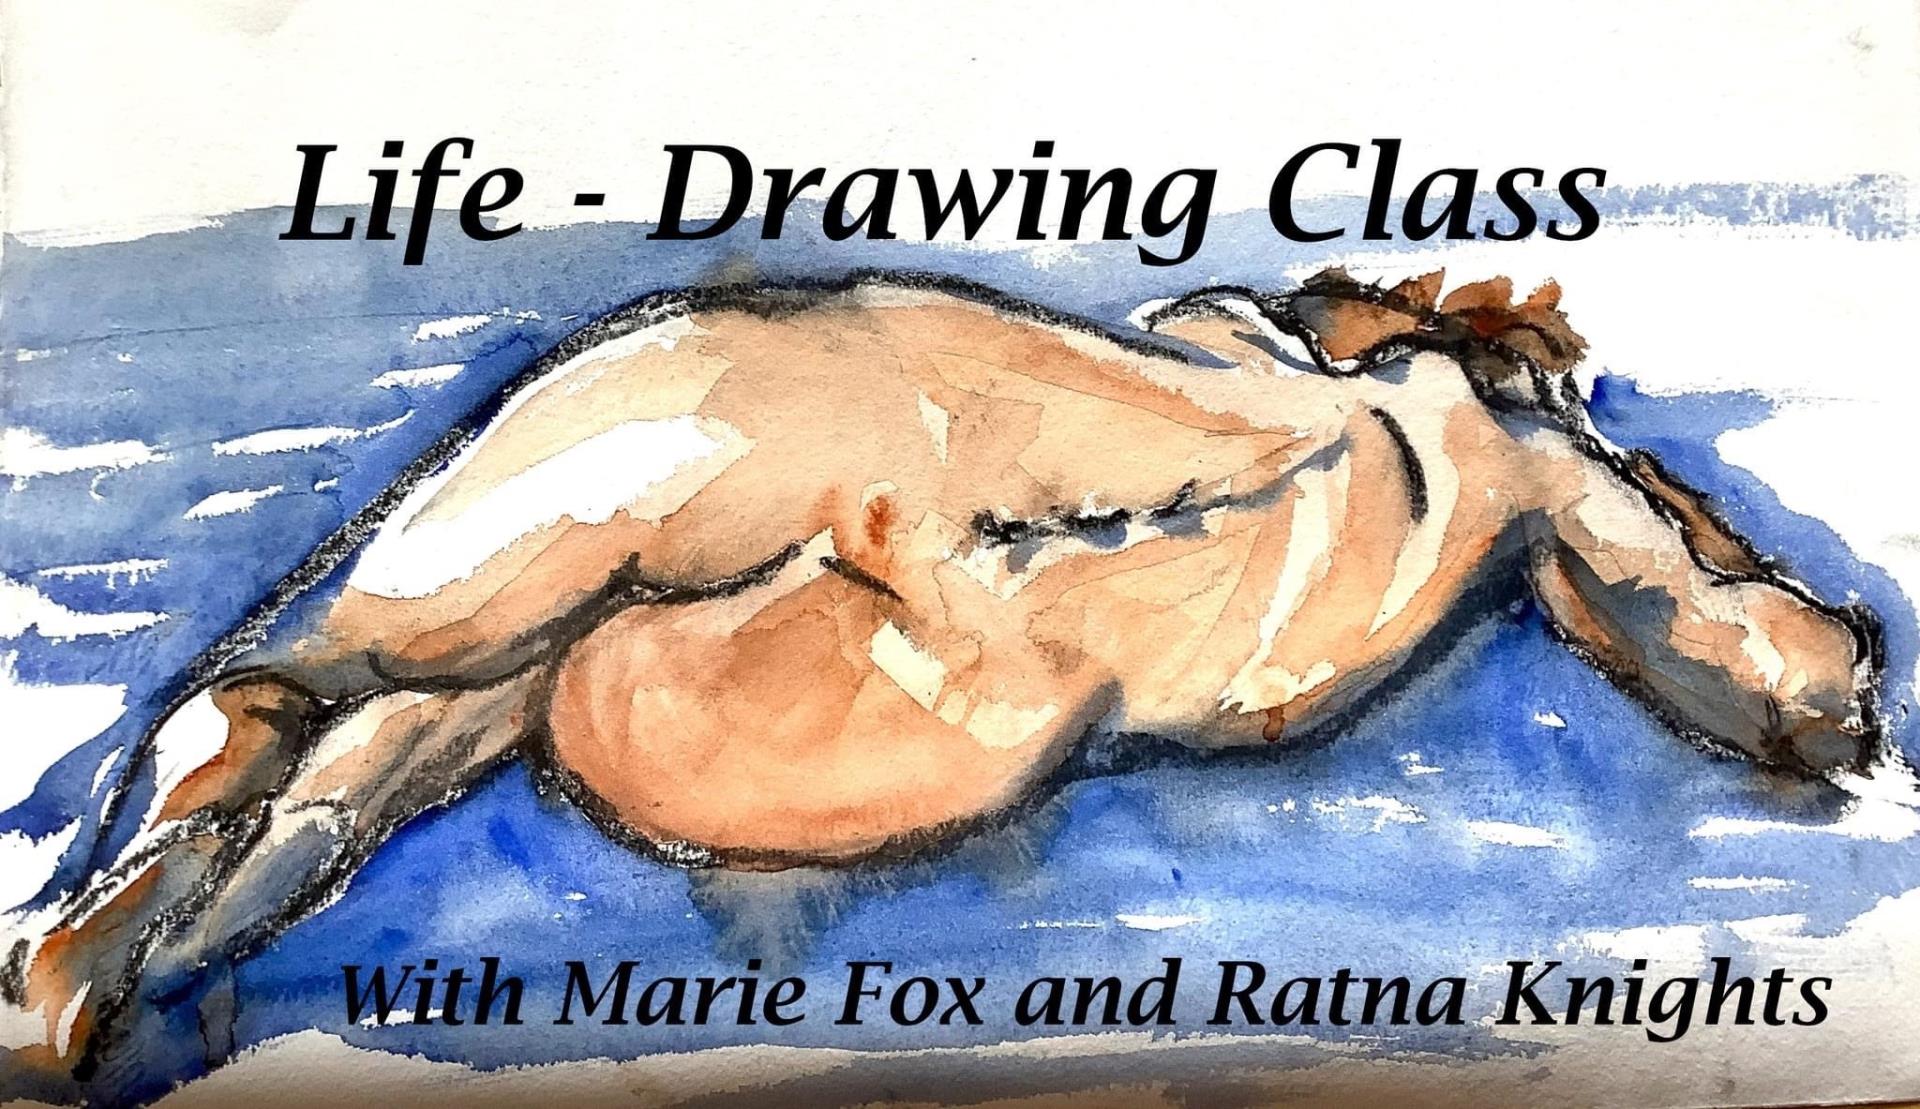 Life Drawing Class With Marie Fox And Ratna Knights